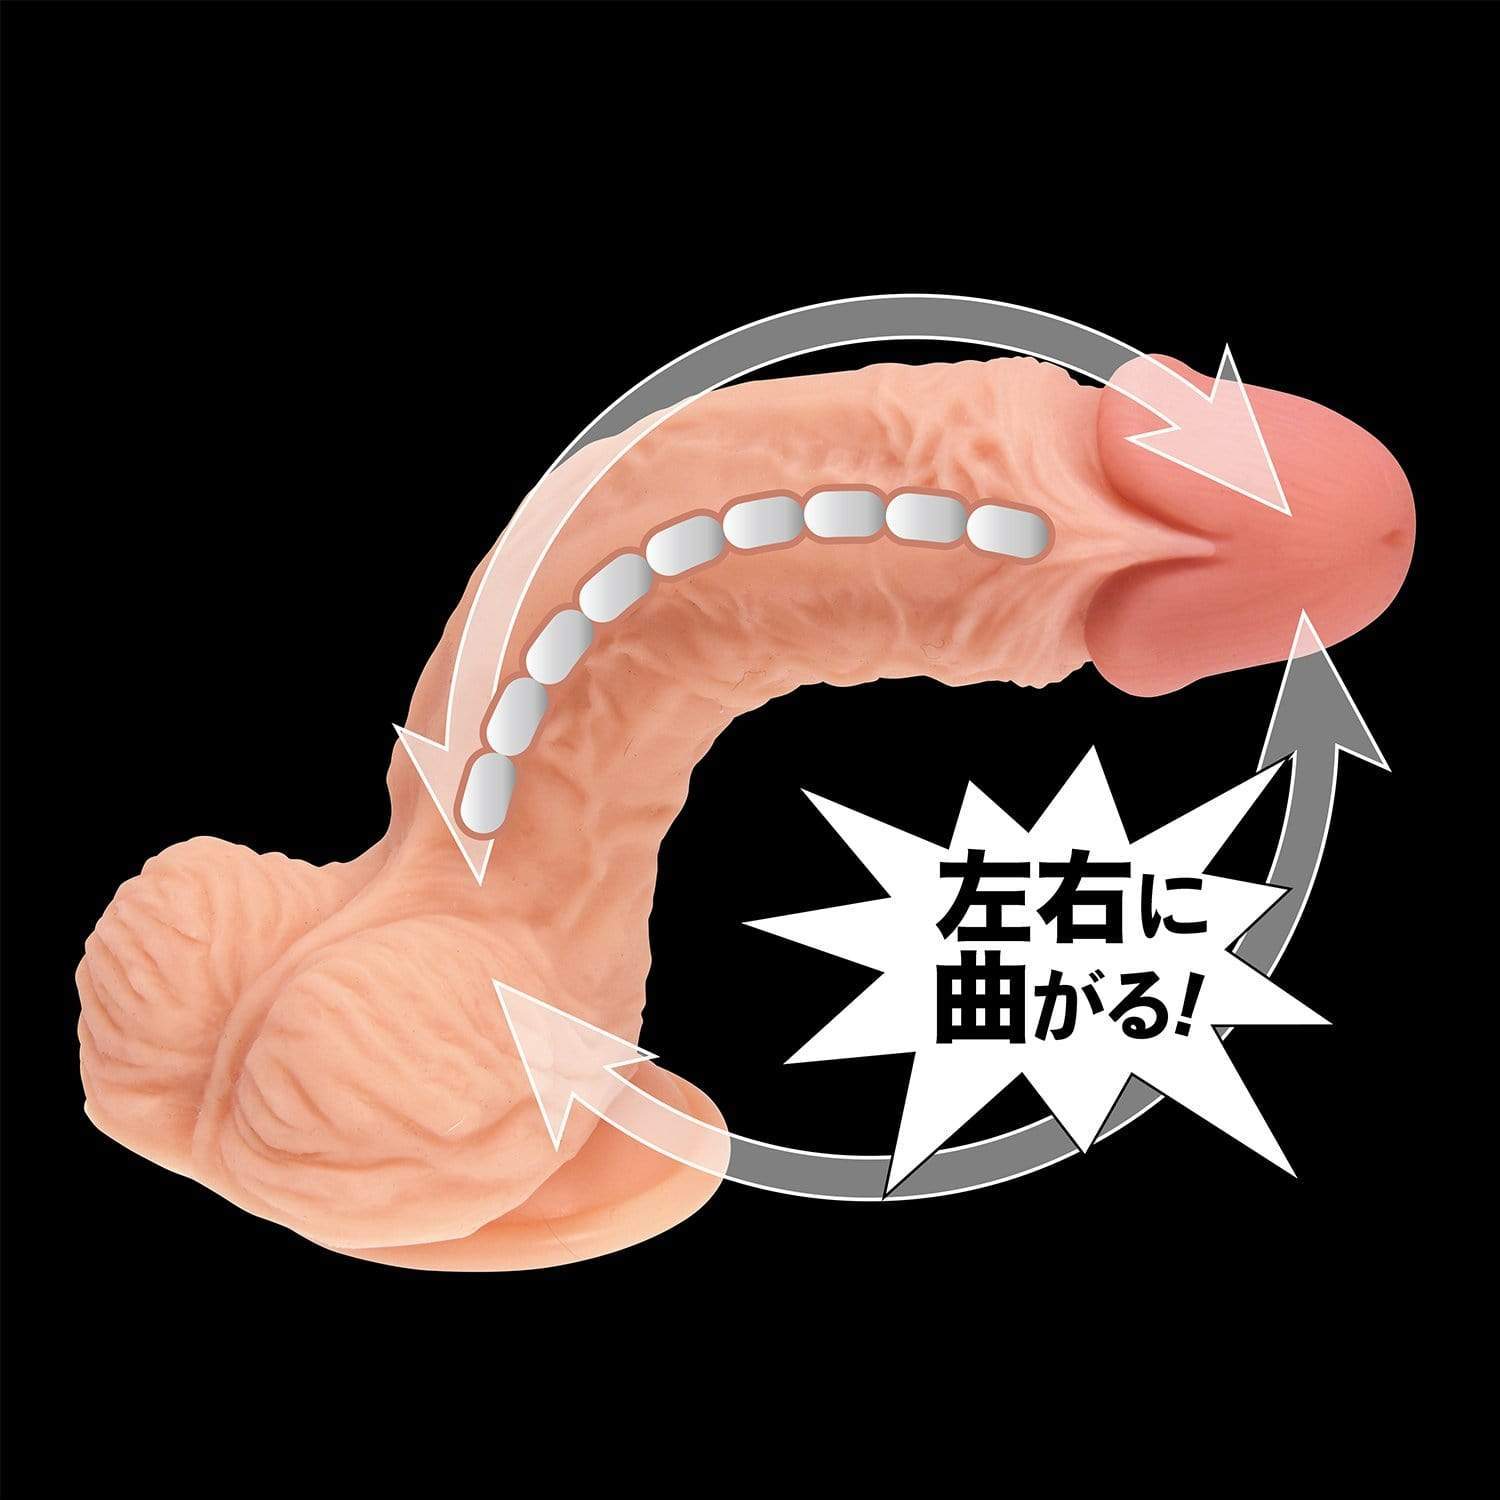 NPG - Bendable Realistic Dildo Number 1 (Beige) Realistic Dildo with suction cup (Non Vibration) 4571165976418 CherryAffairs